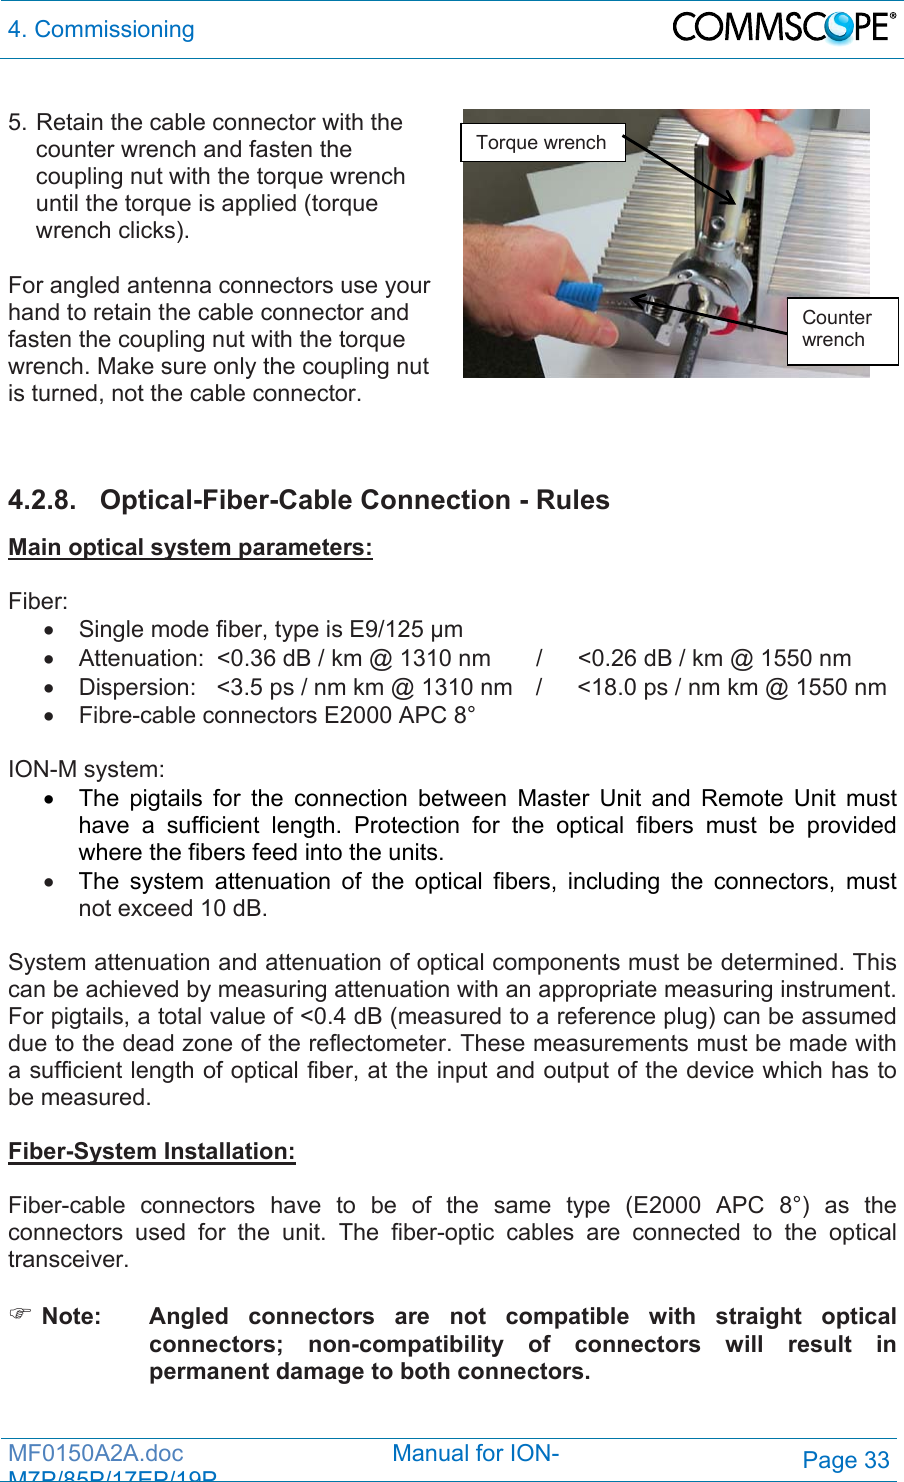 4. Commissioning  MF0150A2A.doc                                Manual for ION-M7P/85P/17EP/19PPage 33  5. Retain the cable connector with the counter wrench and fasten the coupling nut with the torque wrench until the torque is applied (torque wrench clicks).  For angled antenna connectors use your hand to retain the cable connector and fasten the coupling nut with the torque wrench. Make sure only the coupling nut is turned, not the cable connector.     4.2.8. Optical-Fiber-Cable Connection - Rules Main optical system parameters:  Fiber:   Single mode fiber, type is E9/125 µm   Attenuation:  &lt;0.36 dB / km @ 1310 nm  /  &lt;0.26 dB / km @ 1550 nm   Dispersion:  &lt;3.5 ps / nm km @ 1310 nm  /  &lt;18.0 ps / nm km @ 1550 nm   Fibre-cable connectors E2000 APC 8°  ION-M system:   The pigtails for the connection between Master Unit and Remote Unit must have a sufficient length. Protection for the optical fibers must be provided where the fibers feed into the units.   The system attenuation of the optical fibers, including the connectors, must not exceed 10 dB.  System attenuation and attenuation of optical components must be determined. This can be achieved by measuring attenuation with an appropriate measuring instrument. For pigtails, a total value of &lt;0.4 dB (measured to a reference plug) can be assumed due to the dead zone of the reflectometer. These measurements must be made with a sufficient length of optical fiber, at the input and output of the device which has to be measured.  Fiber-System Installation:  Fiber-cable connectors have to be of the same type (E2000 APC 8°) as the connectors used for the unit. The fiber-optic cables are connected to the optical transceiver.   Note:   Angled connectors are not compatible with straight optical connectors; non-compatibility of connectors will result in permanent damage to both connectors.  Torque wrench Counter wrench 